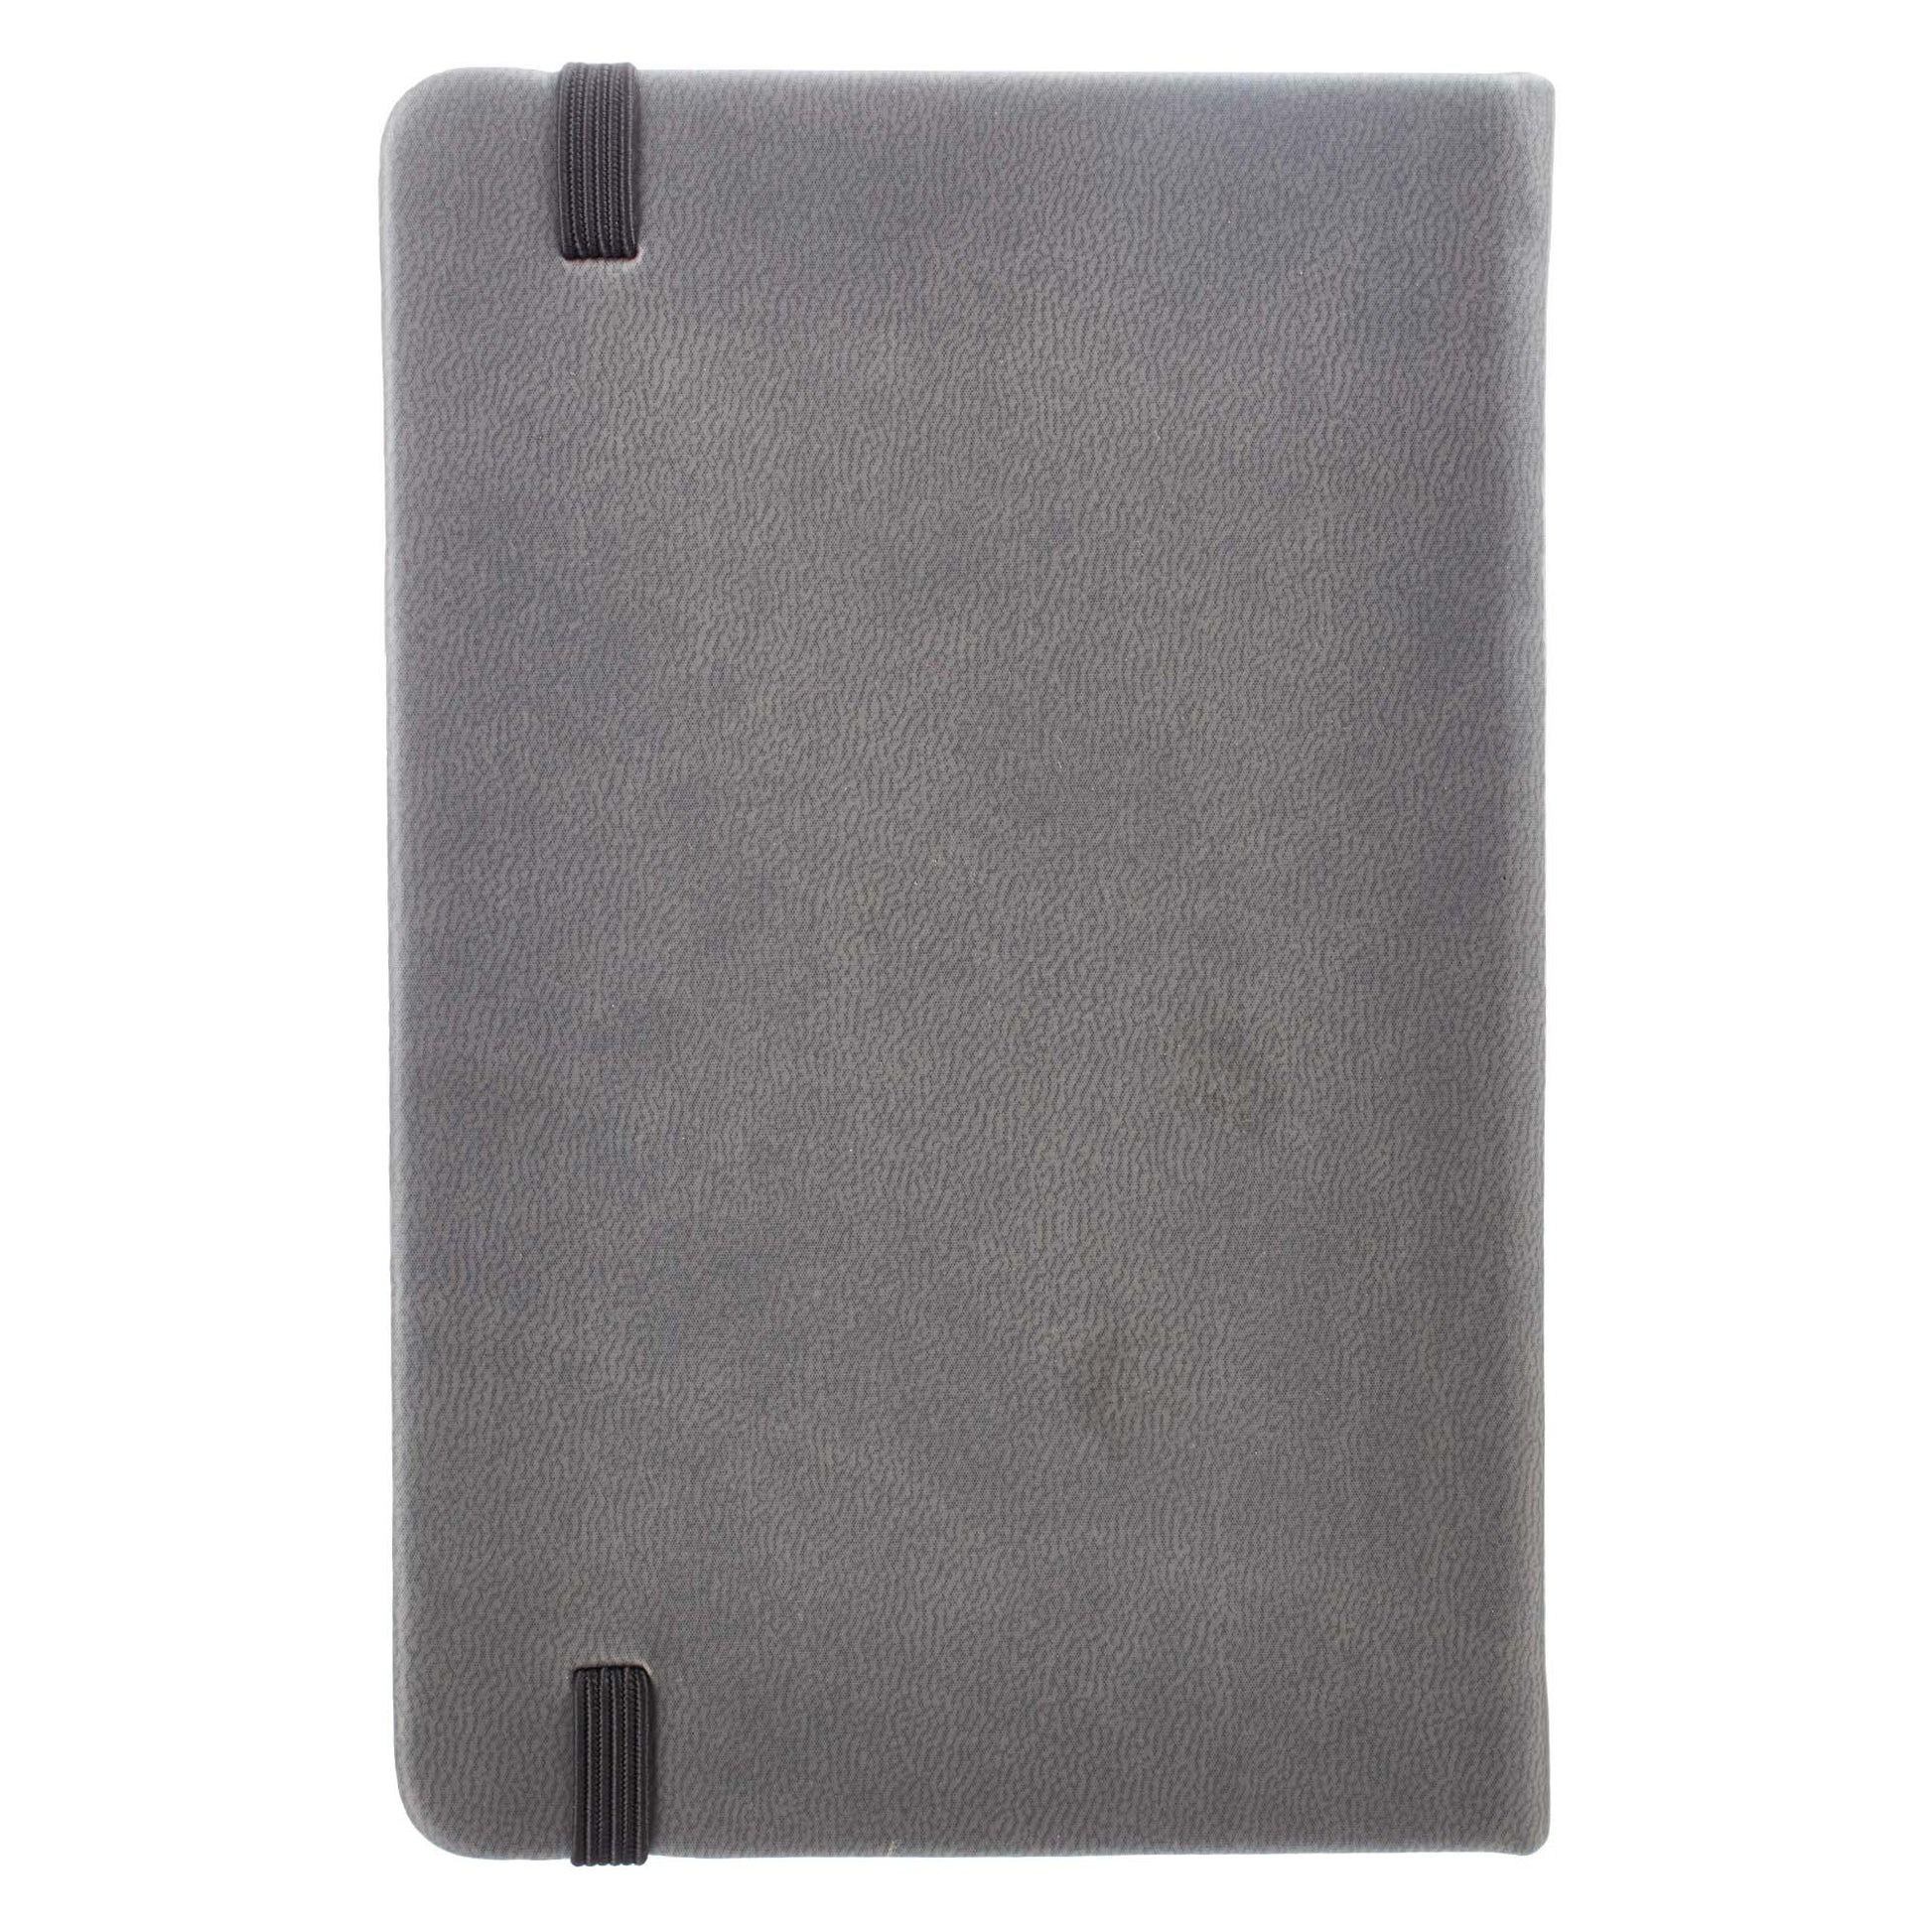 Be Strong Hardcover LuxLeather Notebook with Elastic Closure - Joshua 1:9 - The Christian Gift Company